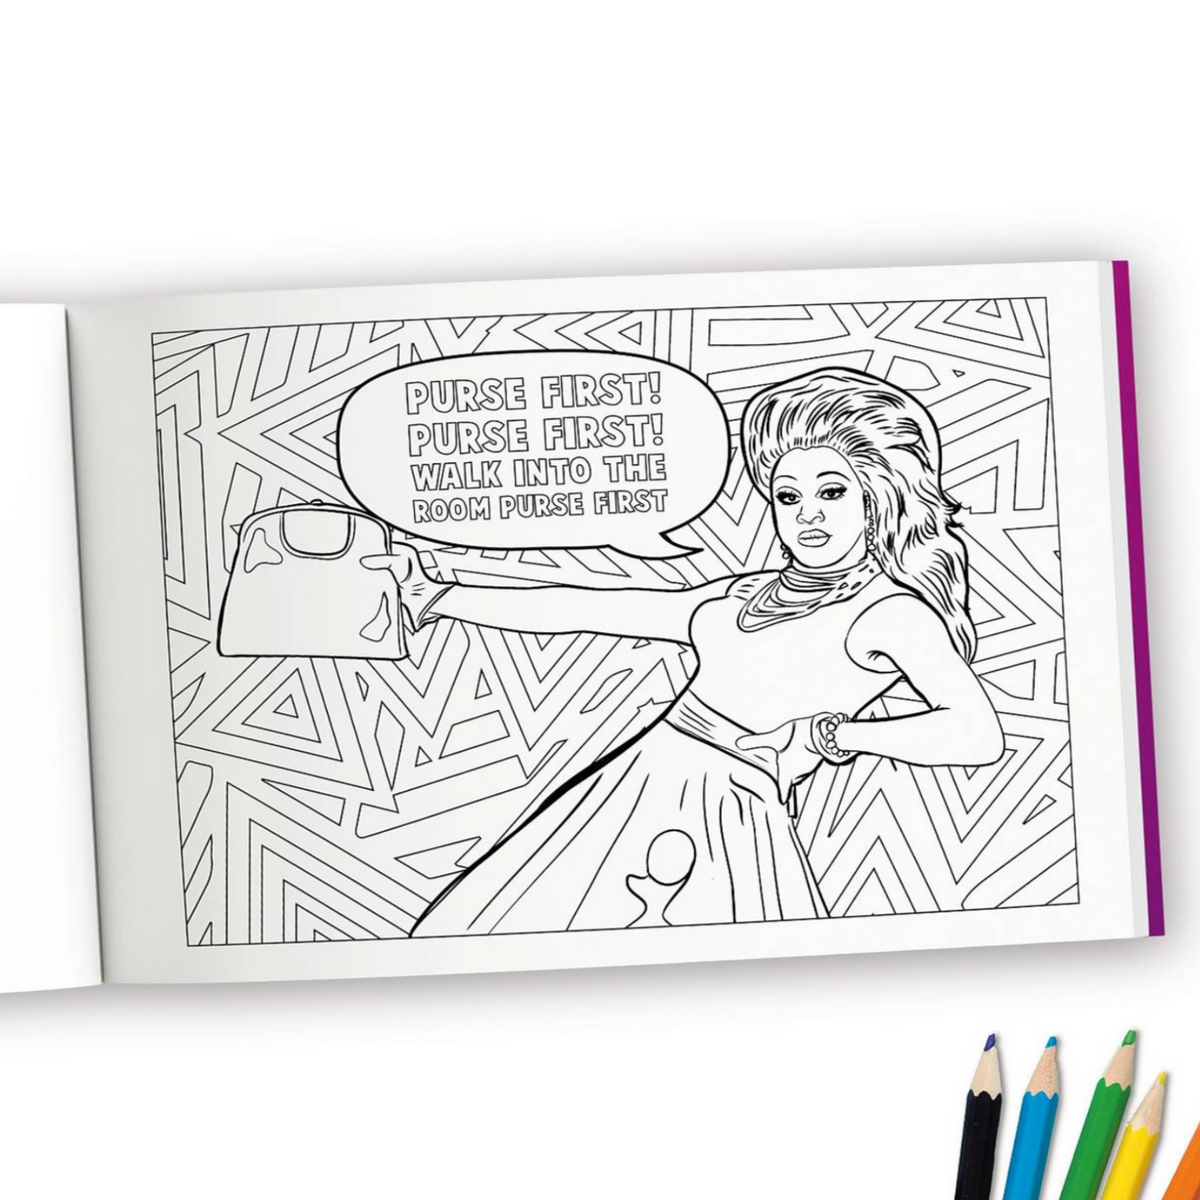 Black Queen Coloring Book: An Adult Coloring Book For The Badass Black Women [Book]